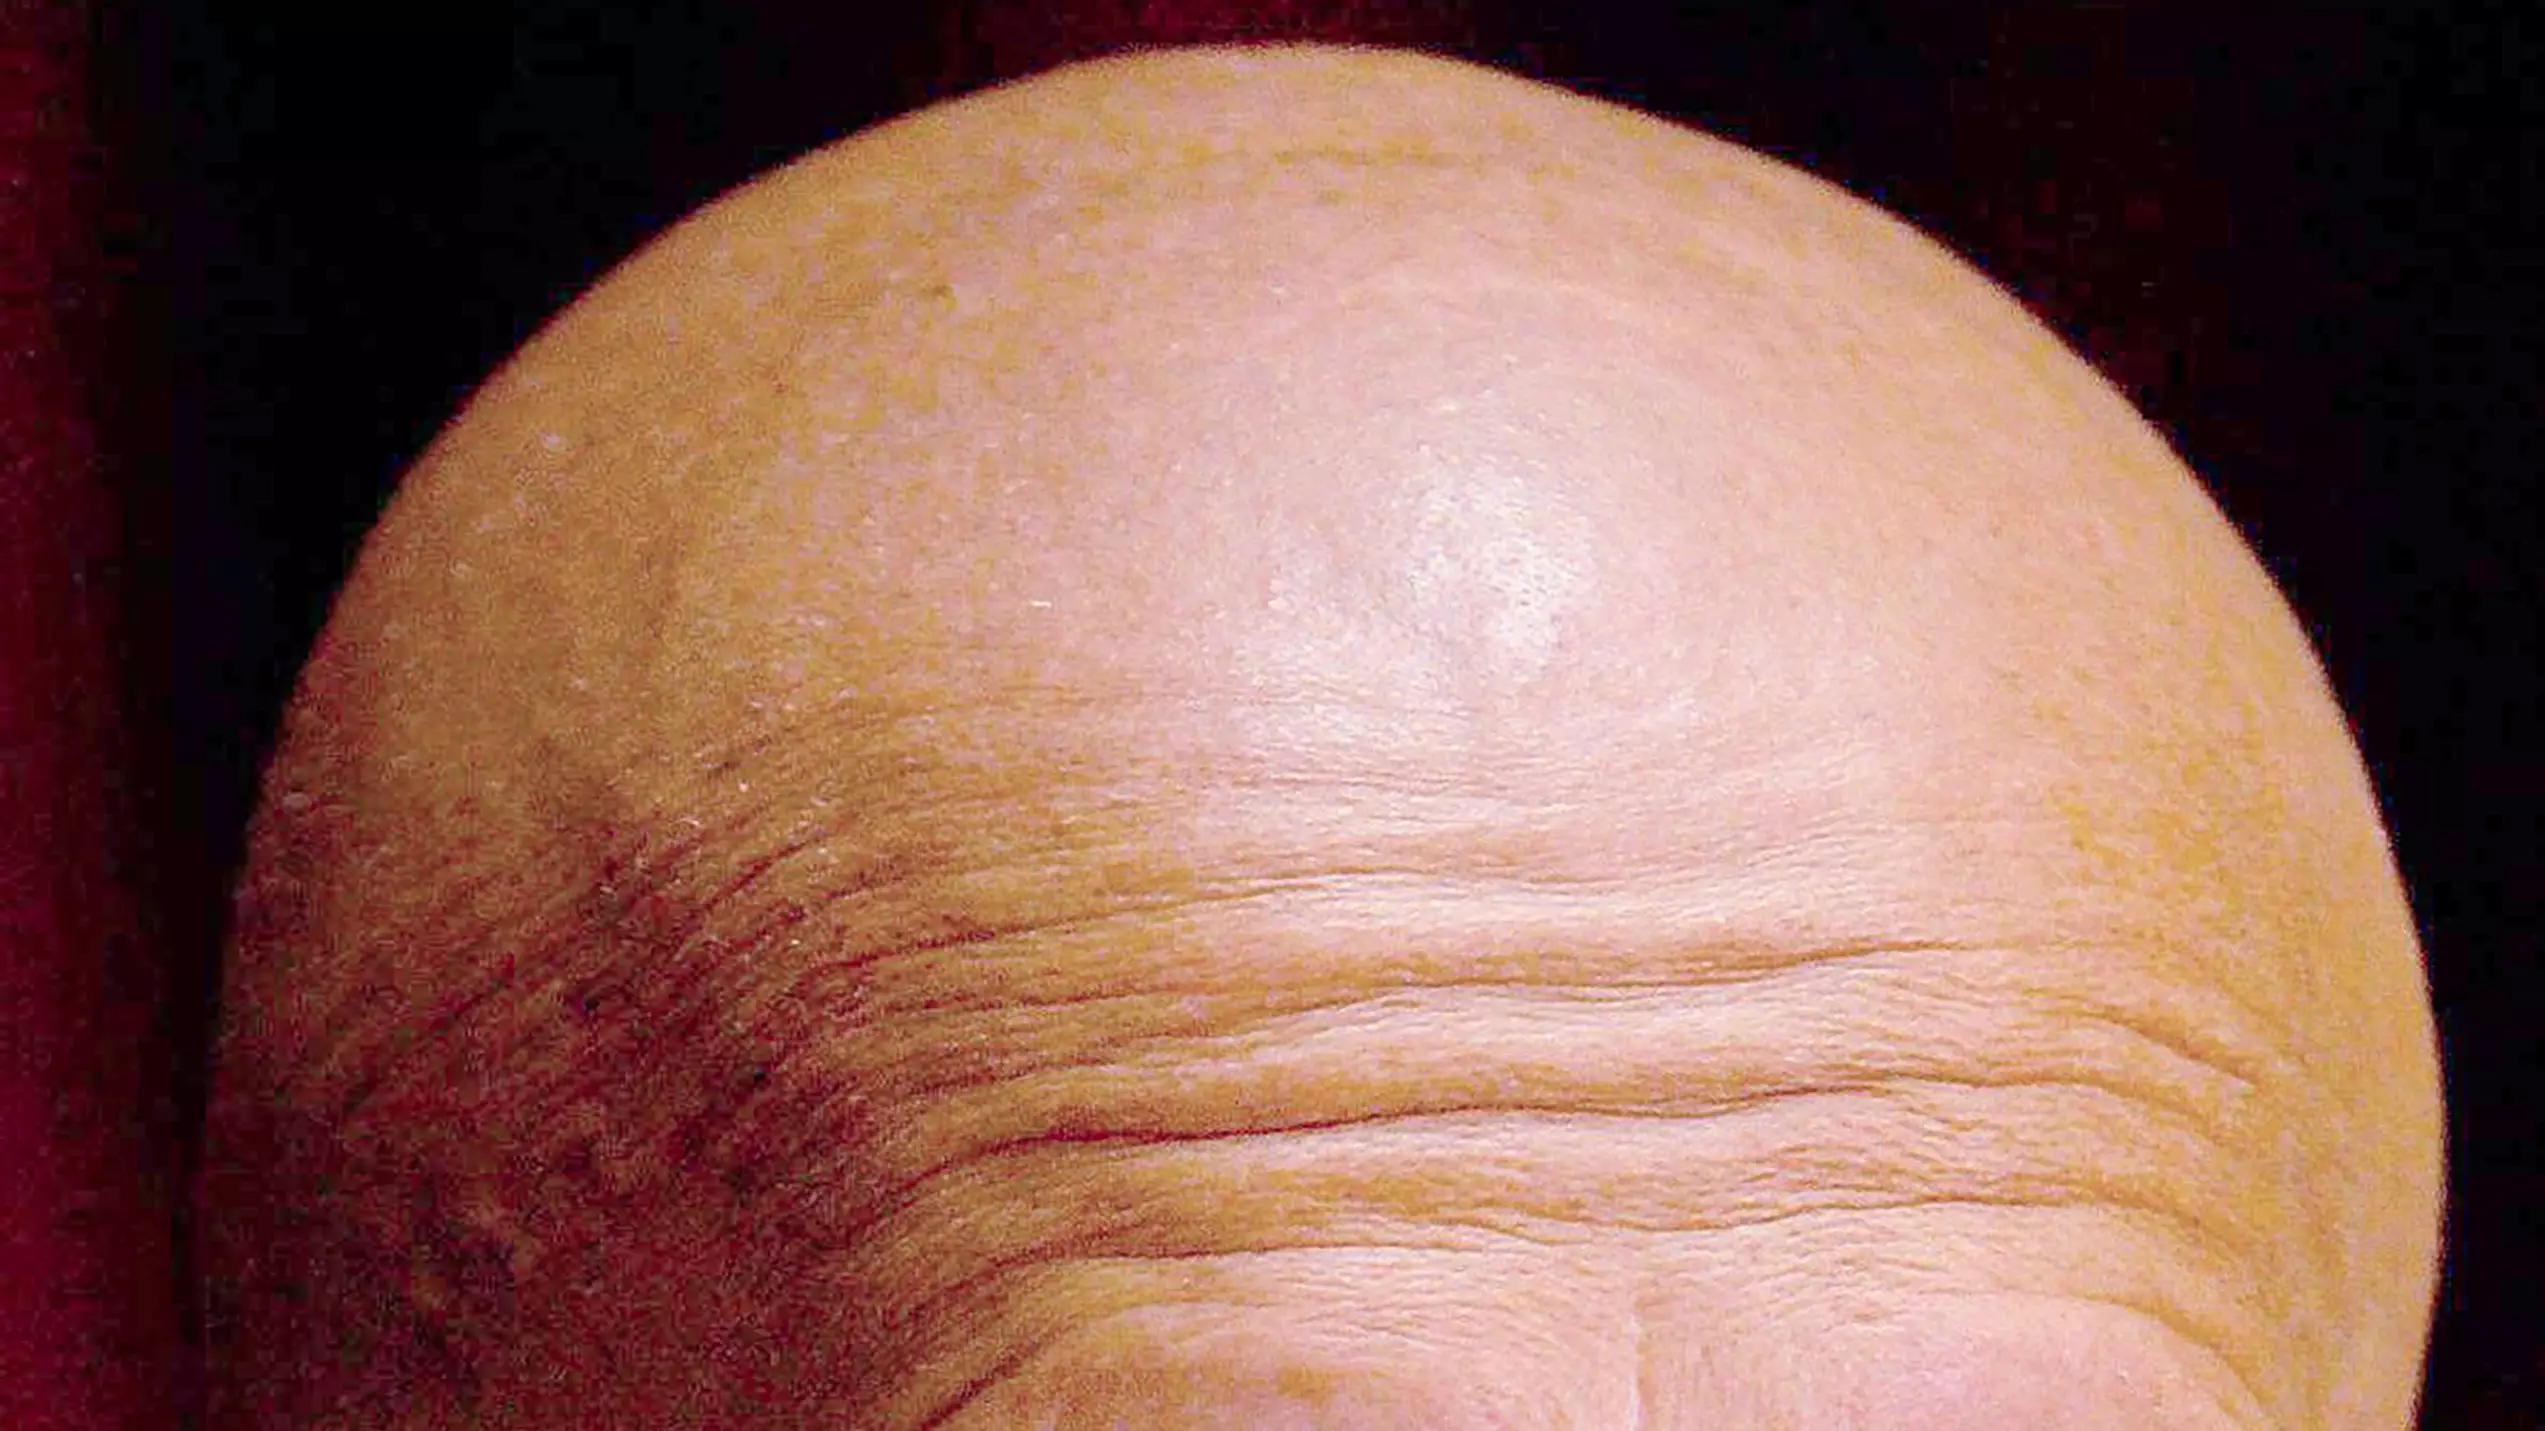 People Who Working Longer Hours Twice As Likely To Go Bald